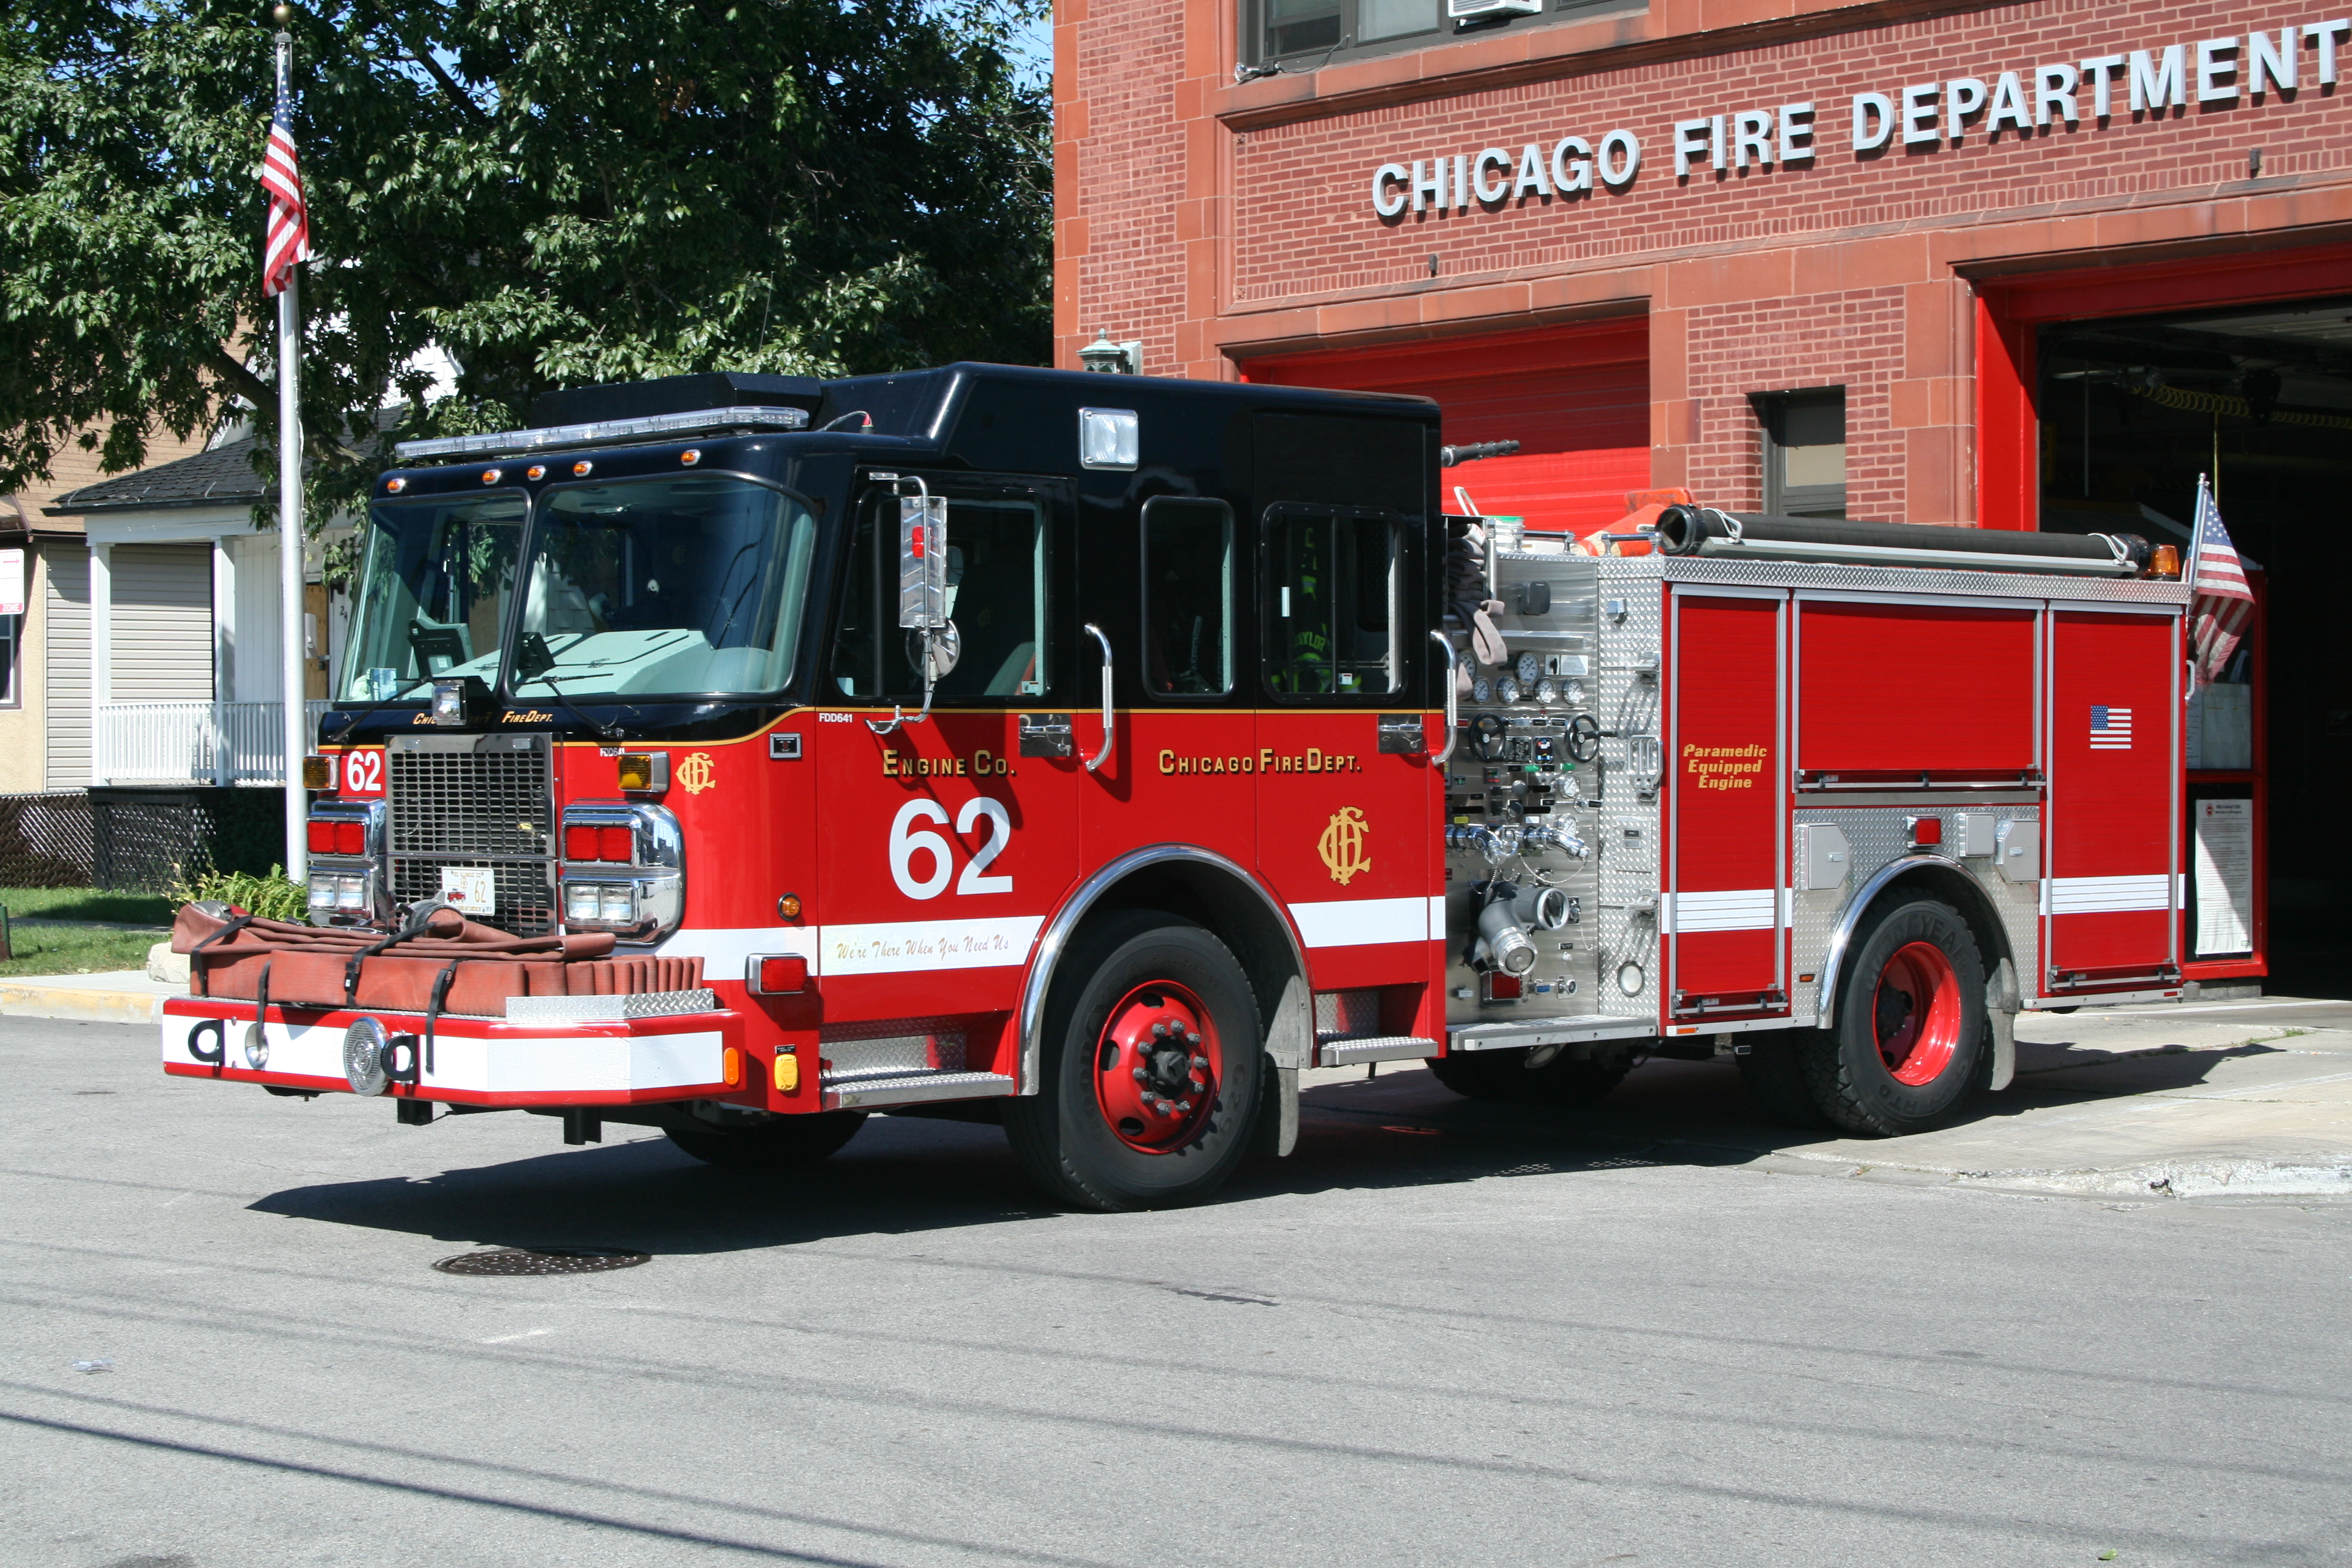 Chicago Fire Department Engine 62